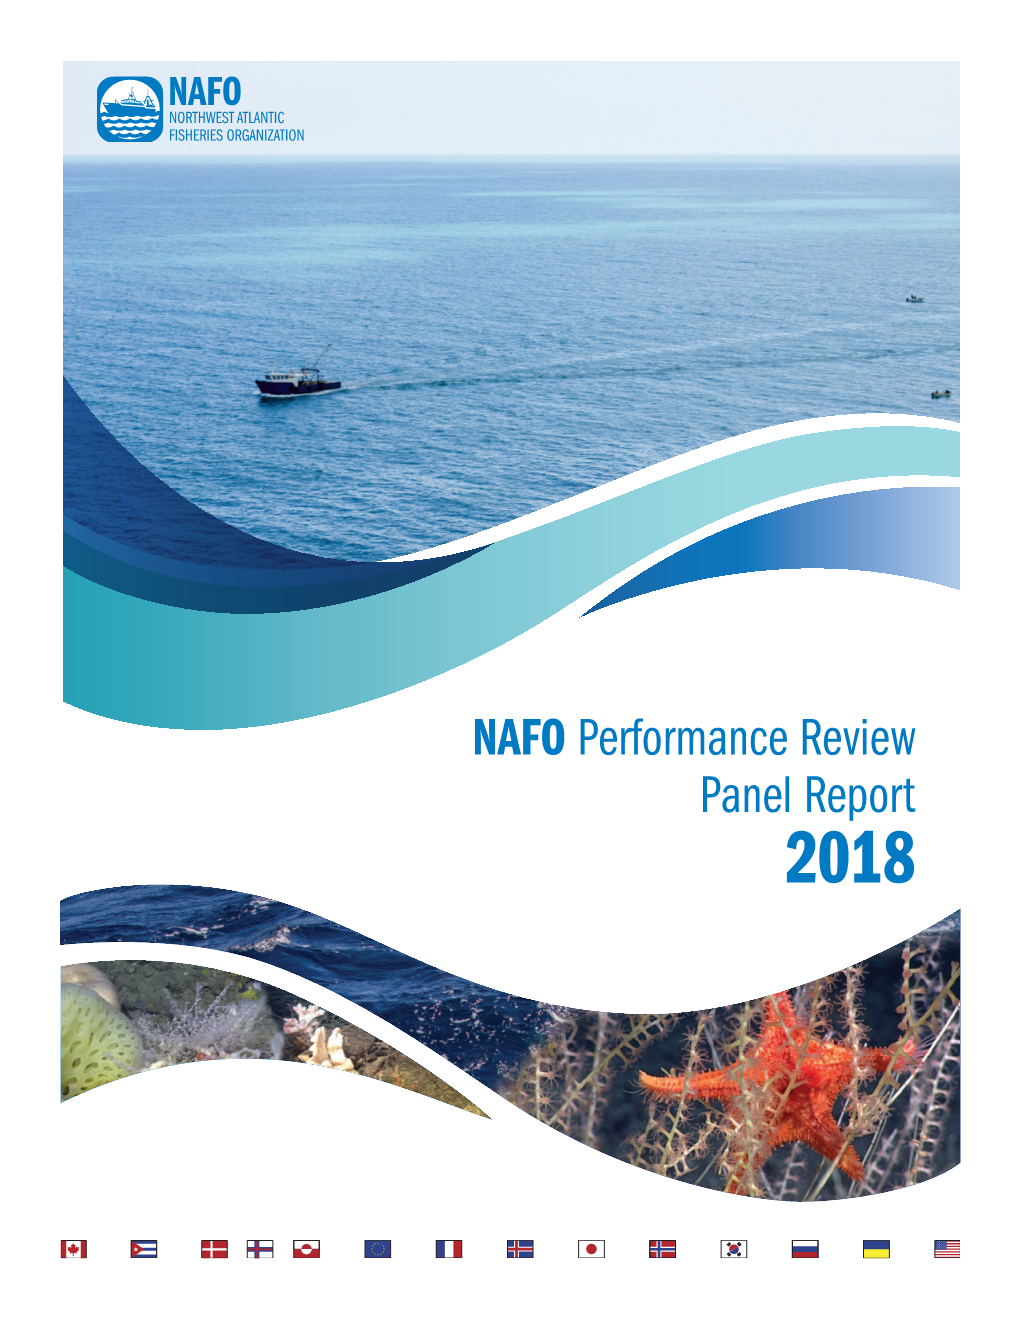 NAFO Performance Review Panel Report 2018 Creative Cc Commons COMMONS DEED Attribution-Noncommercial 2.5 Canada